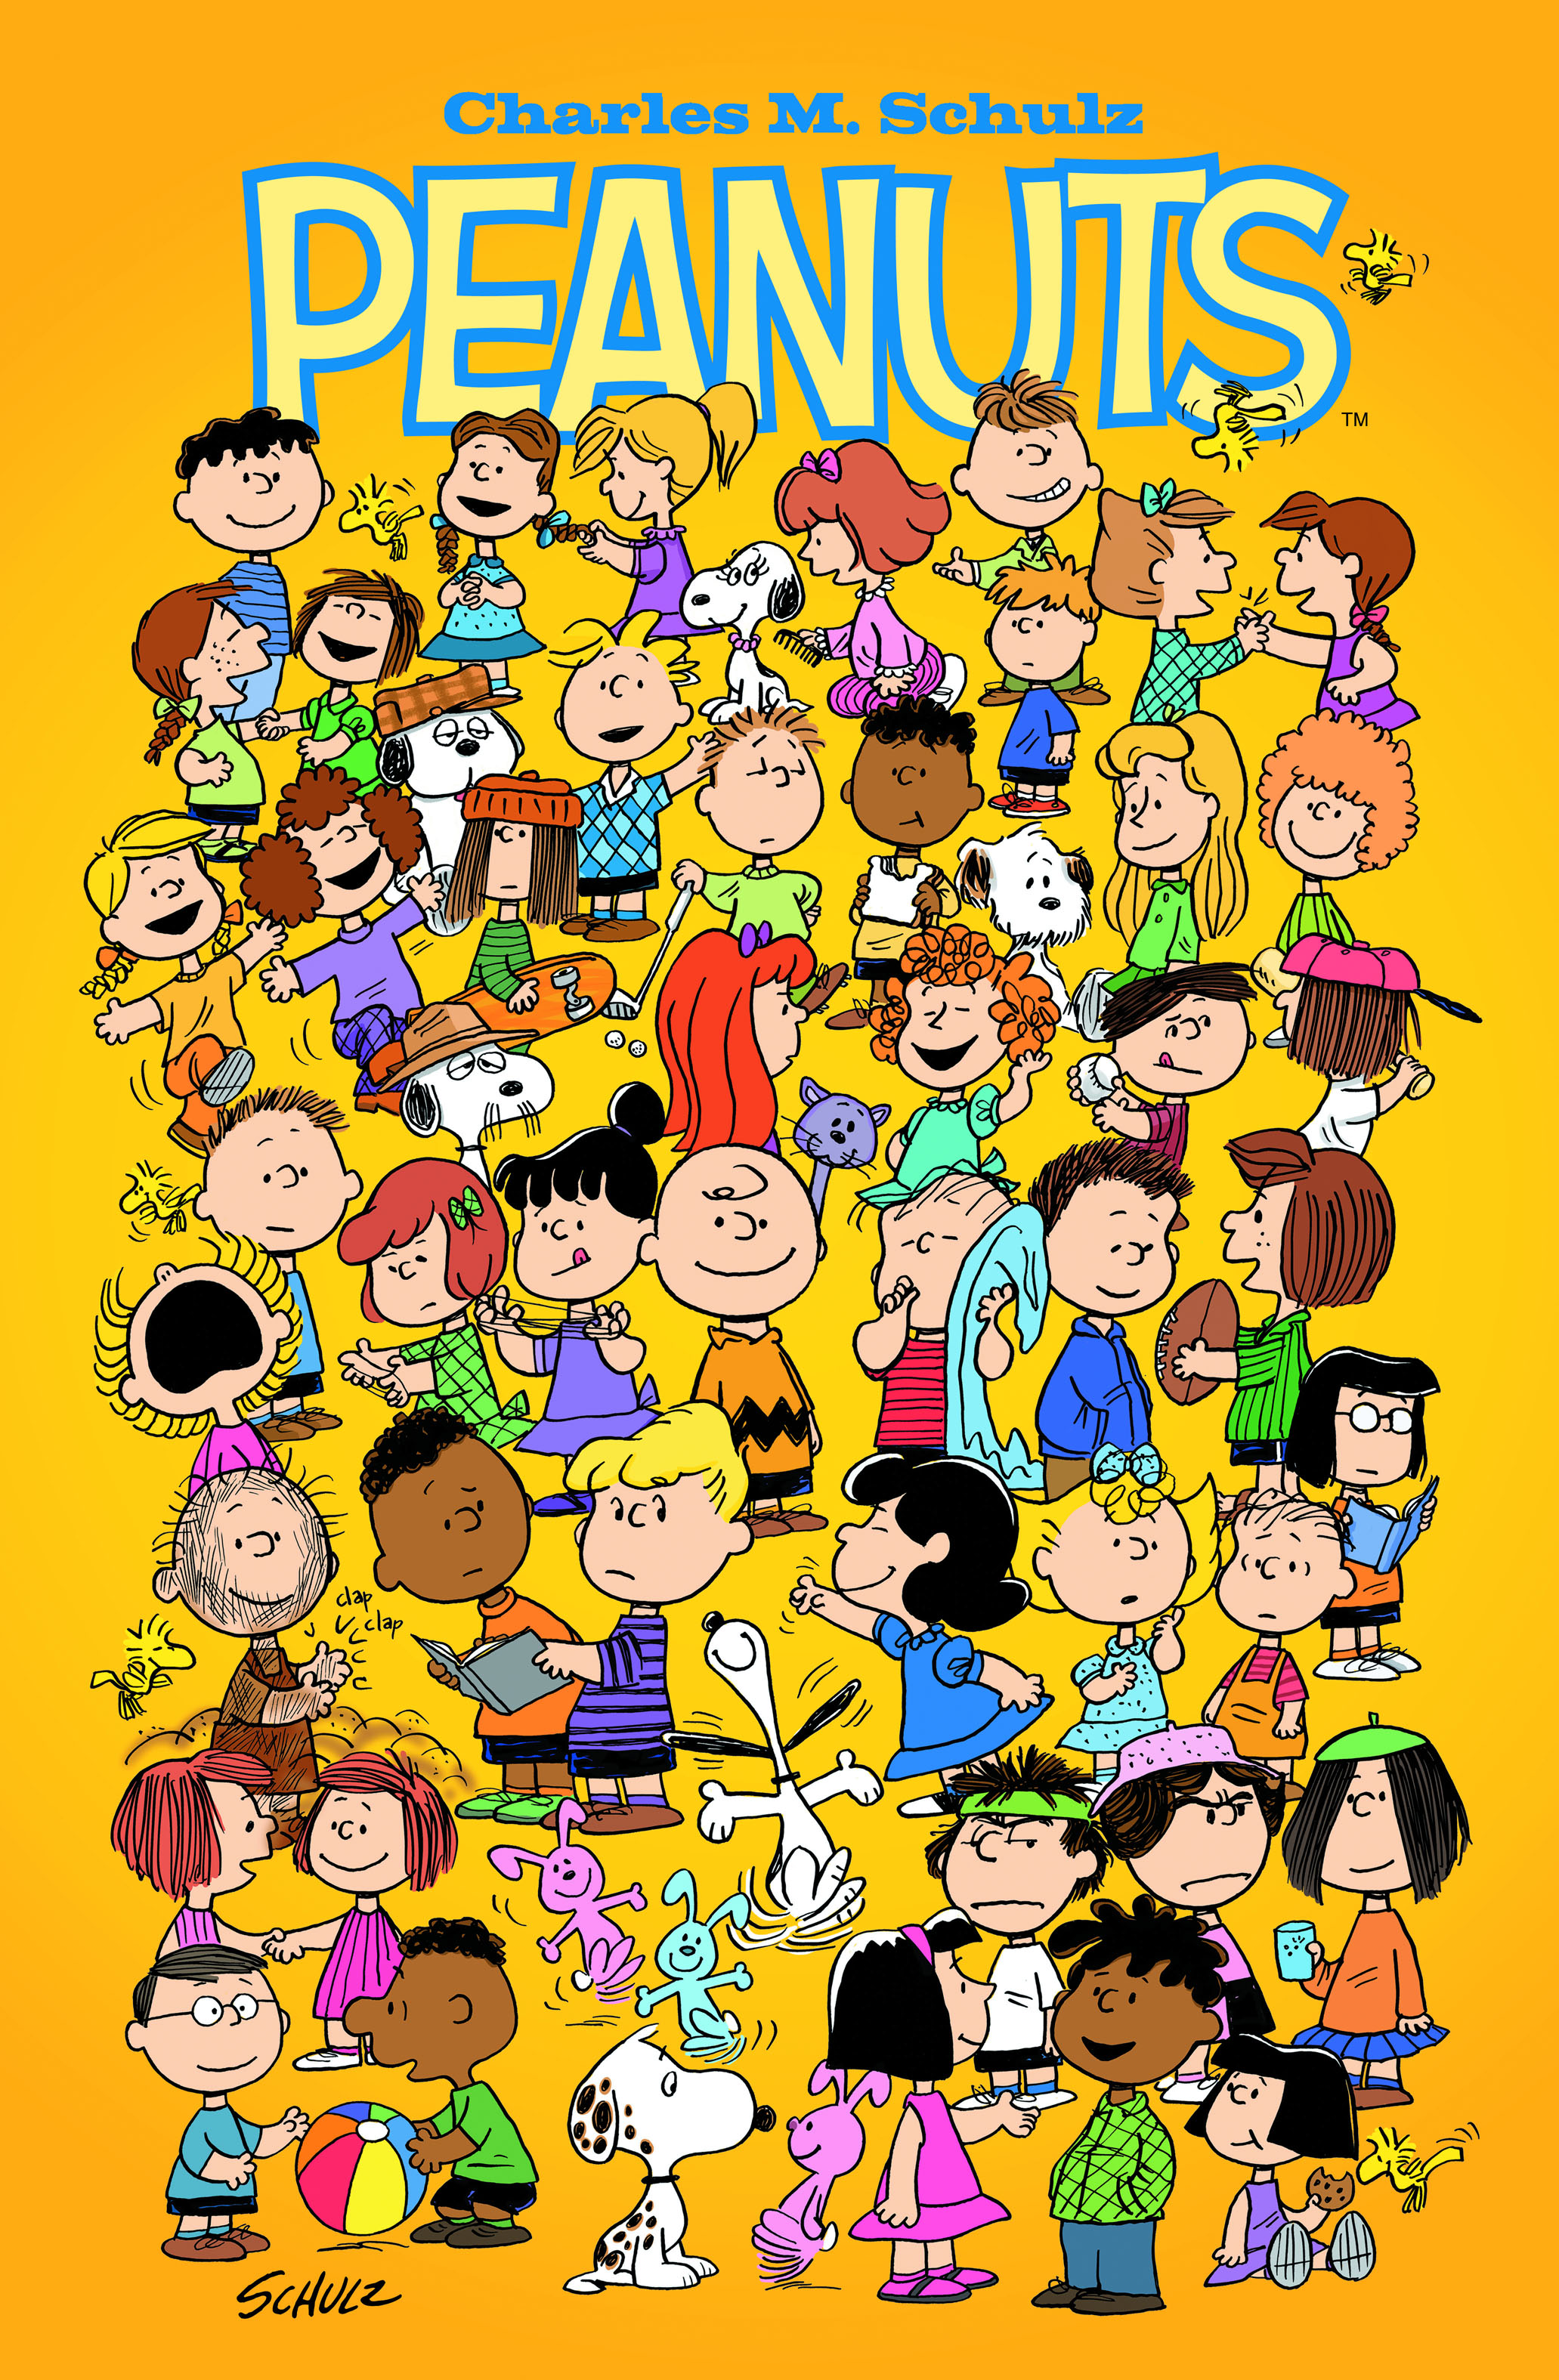 The Complete Peanuts, Vol. 1 by Charles M. Schulz